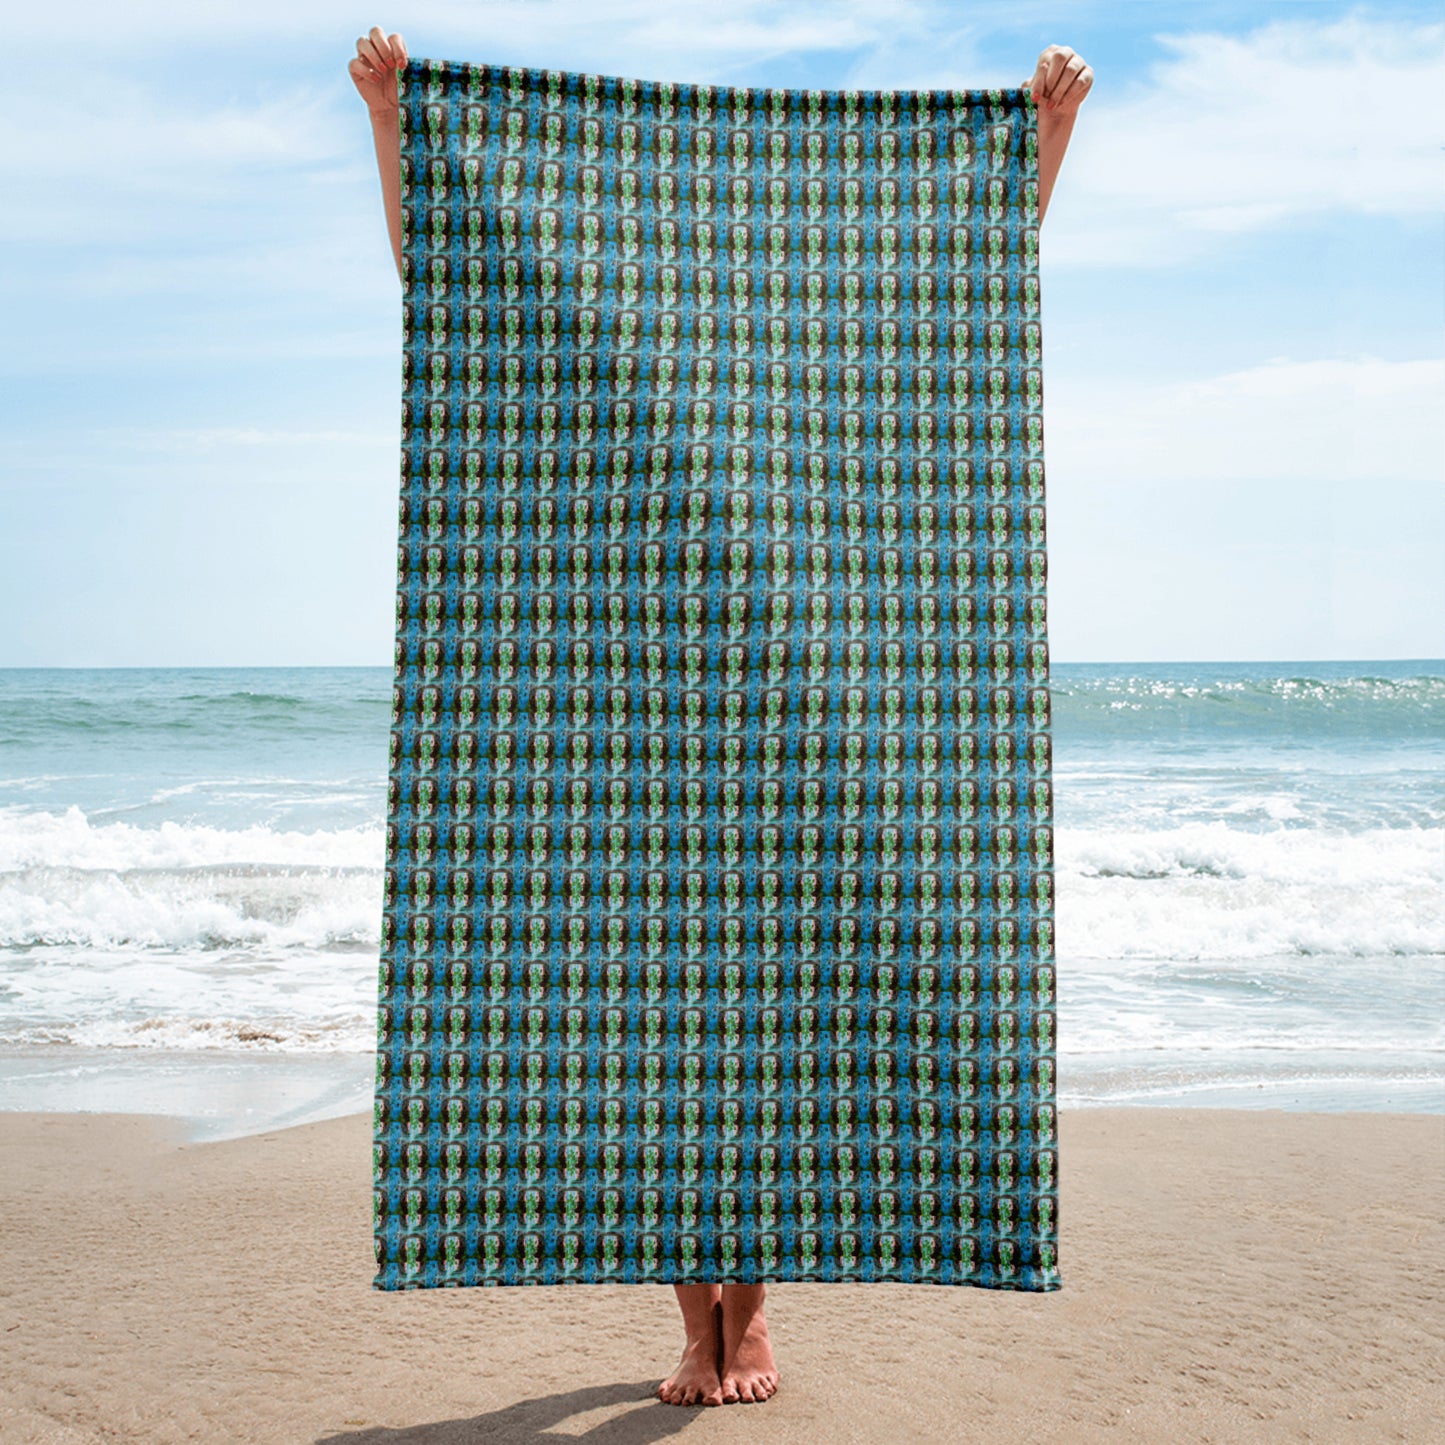 Dubsy Platoin "The Grotto" Towel